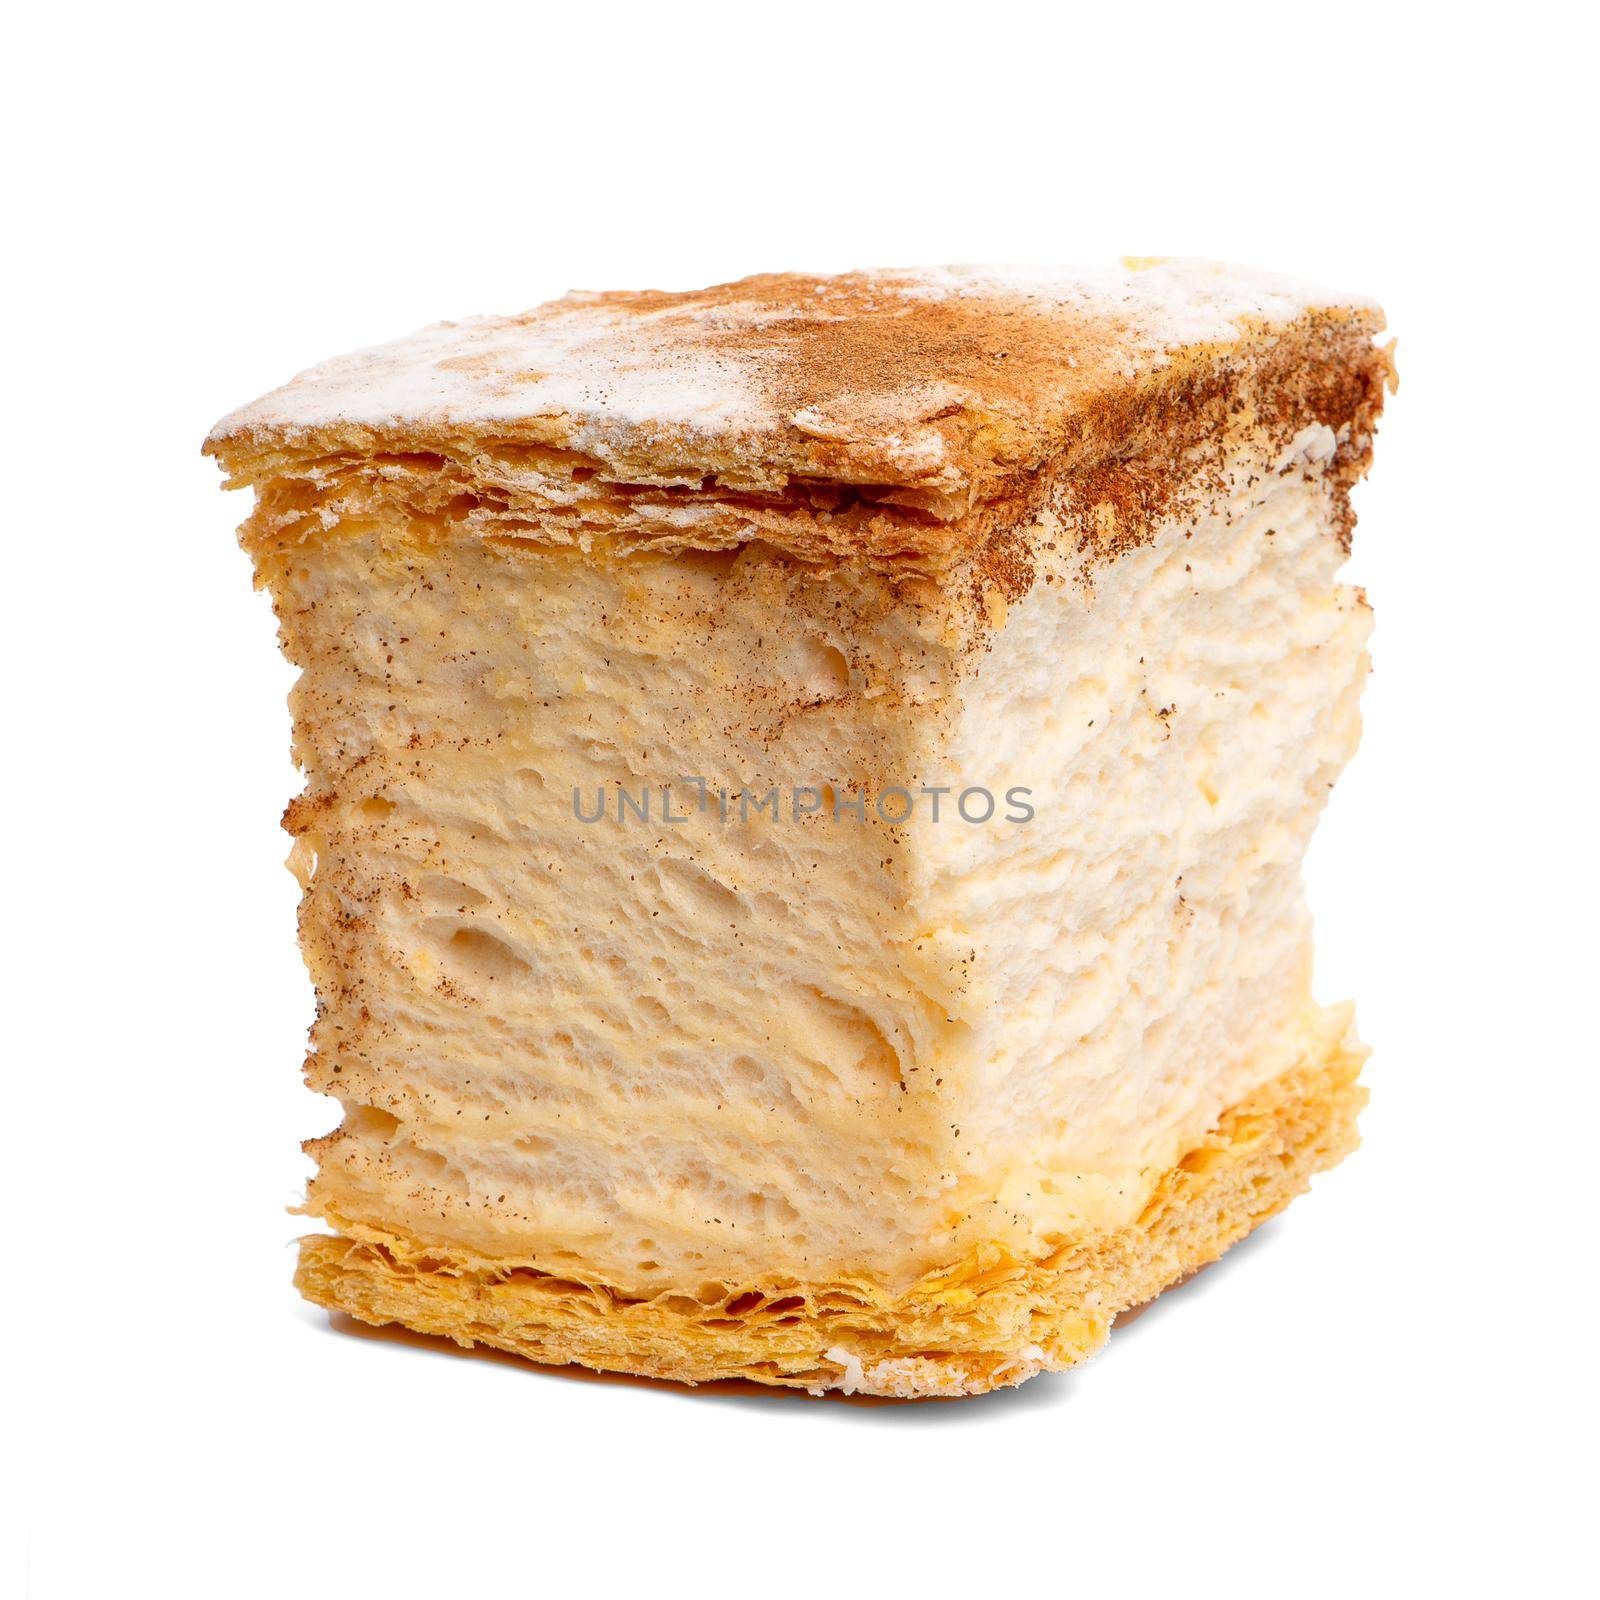 Russo cake pastry isolated on a white background.